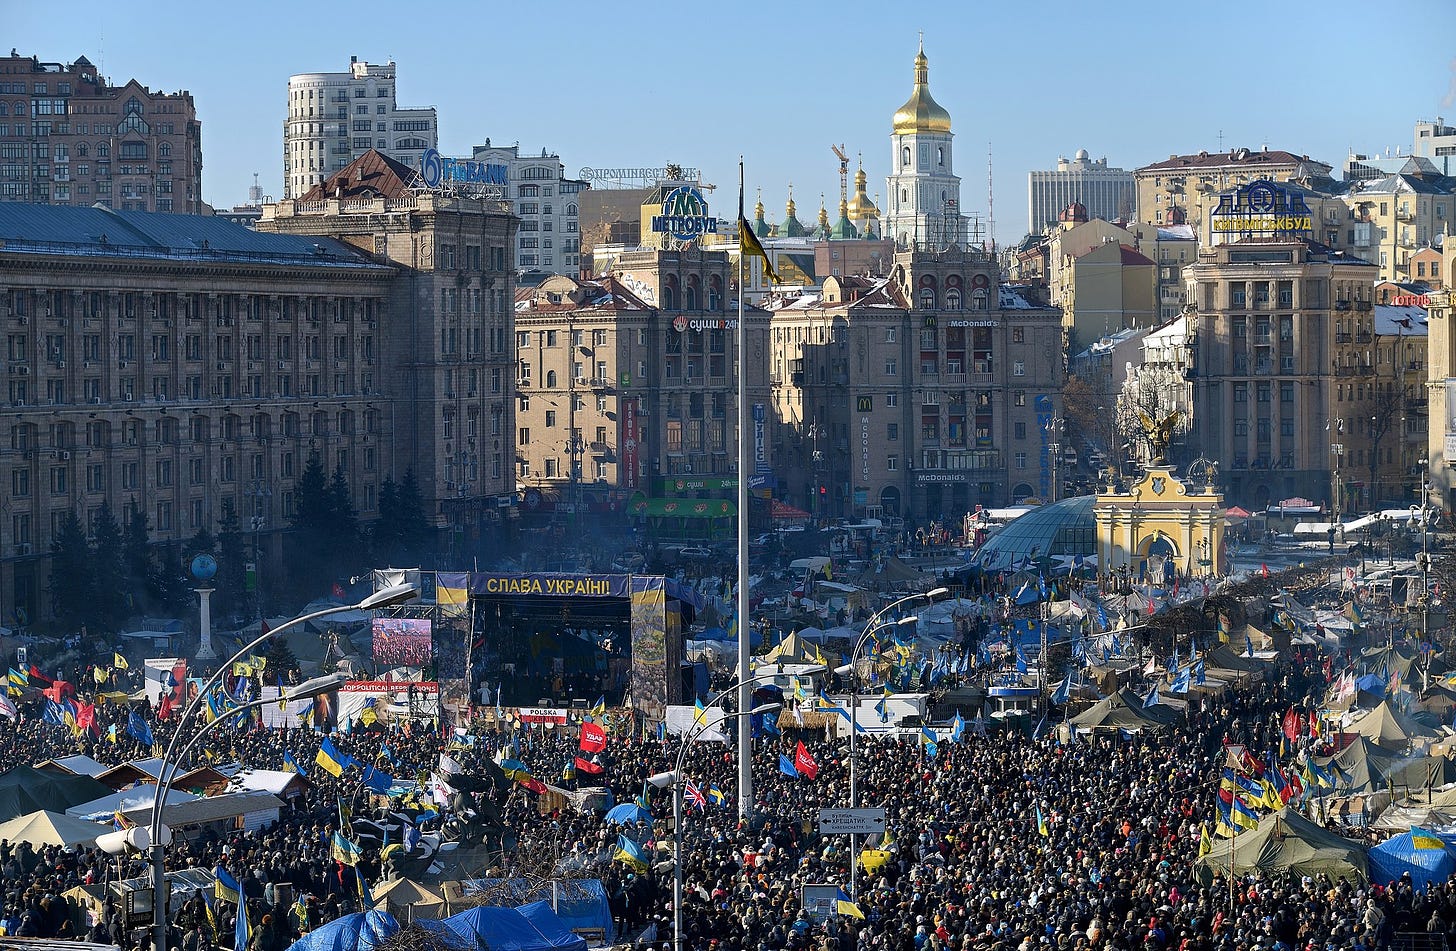 The ‘Euromaidan’ protest in Kiev in February 2014 (Image: В.Власенко, CC BY-SA 3.0, via Wikimedia Commons)